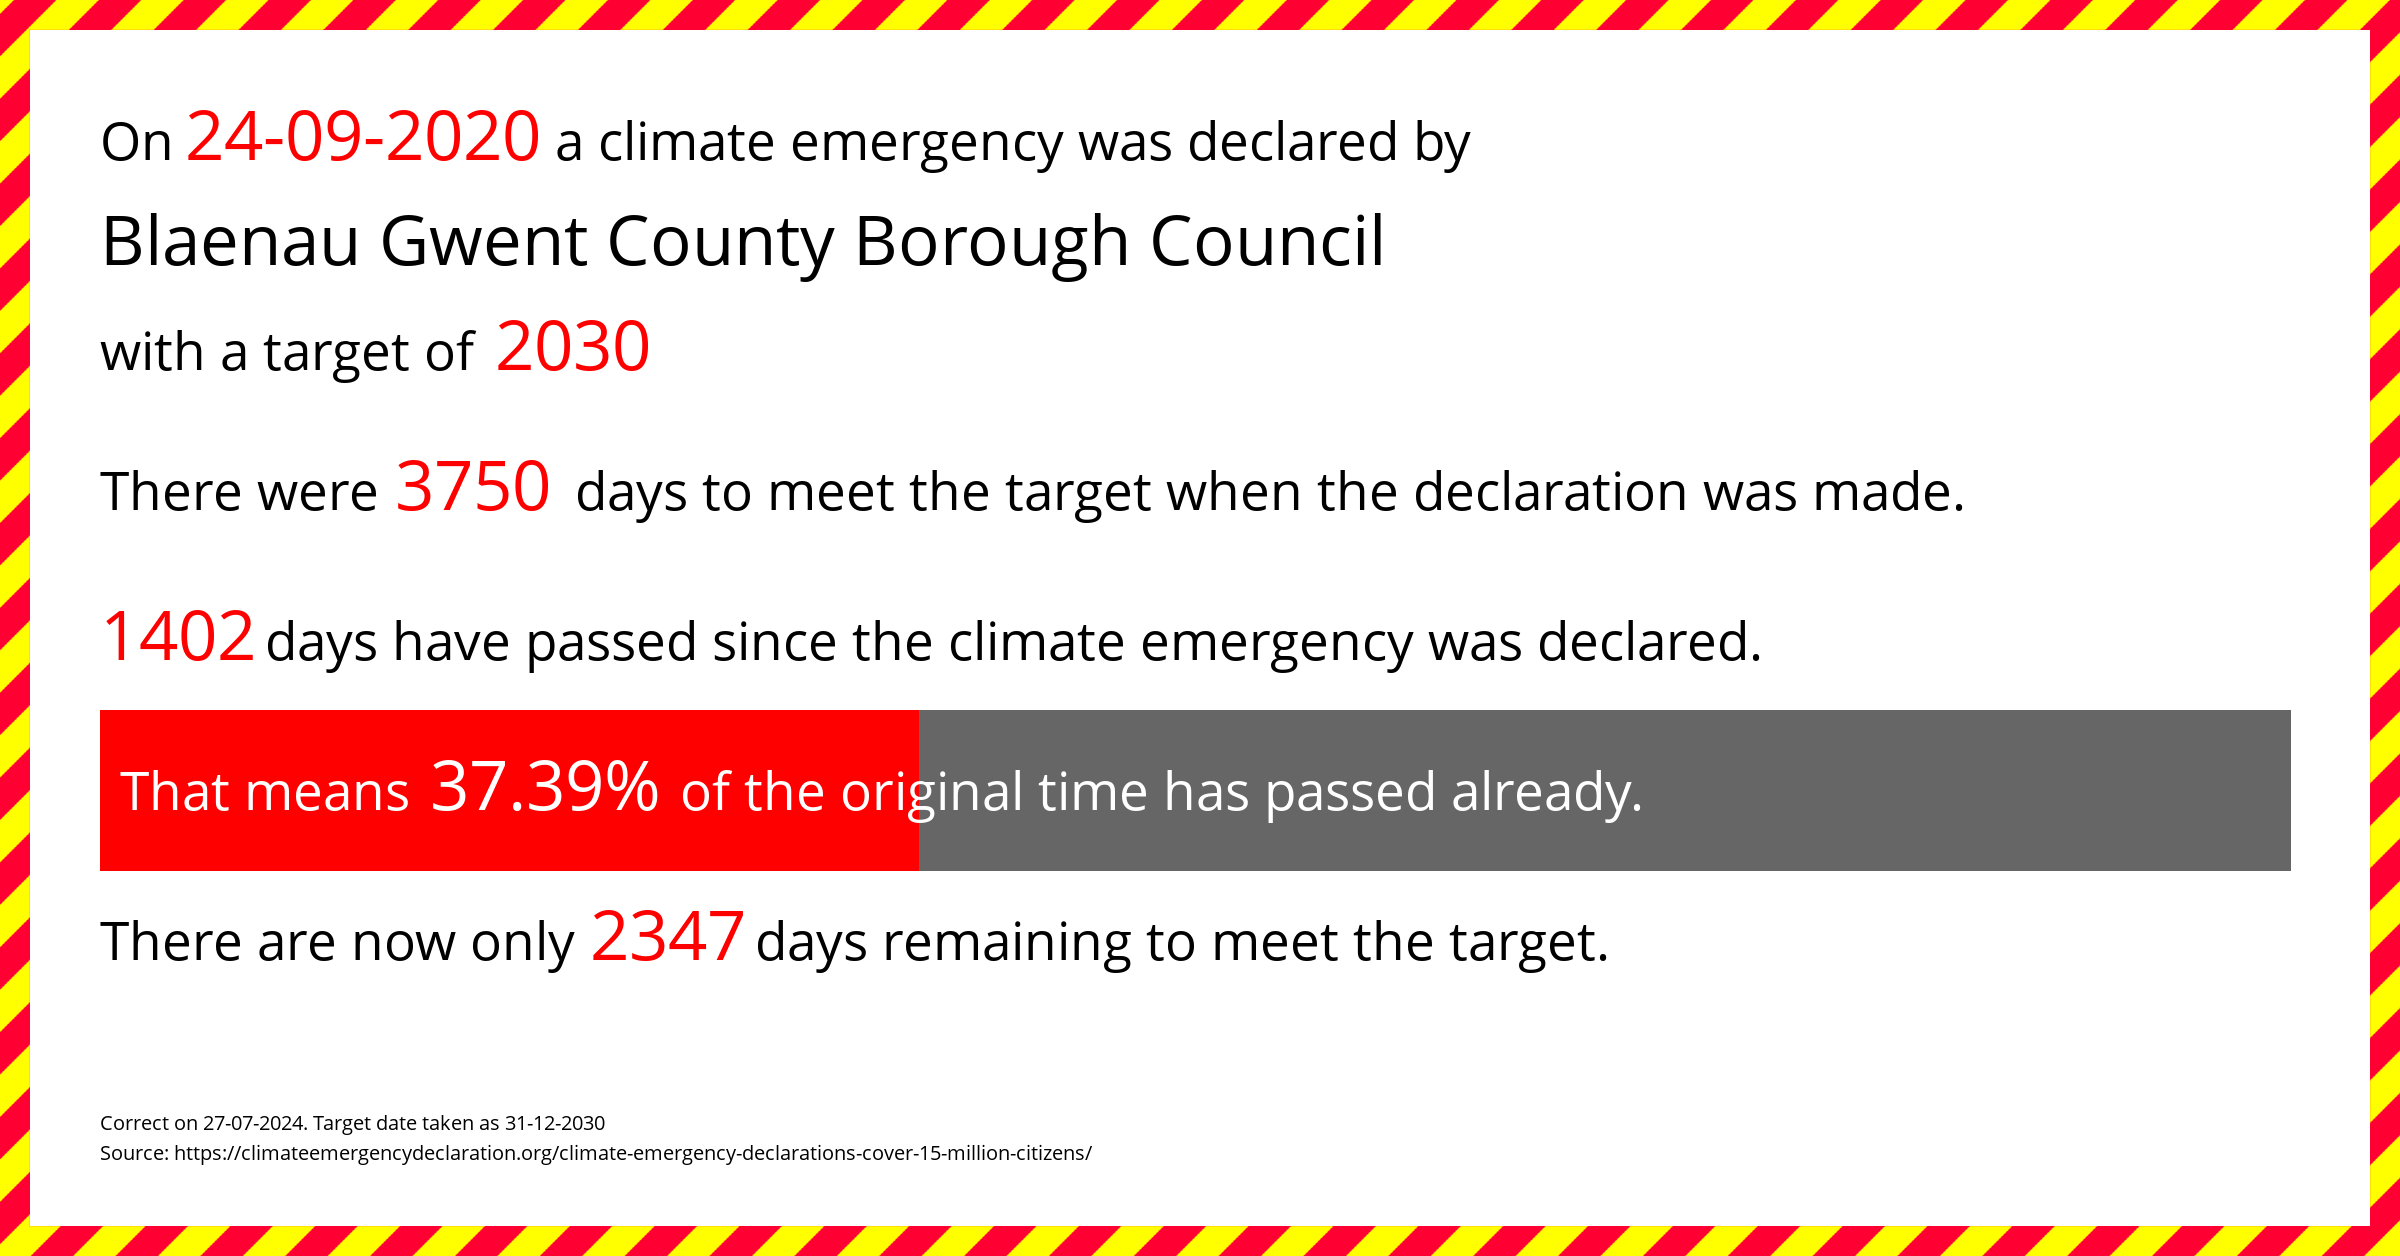 Blaenau Gwent County Borough Council  declared a Climate emergency on Thursday 24th September 2020, with a target of 2030.